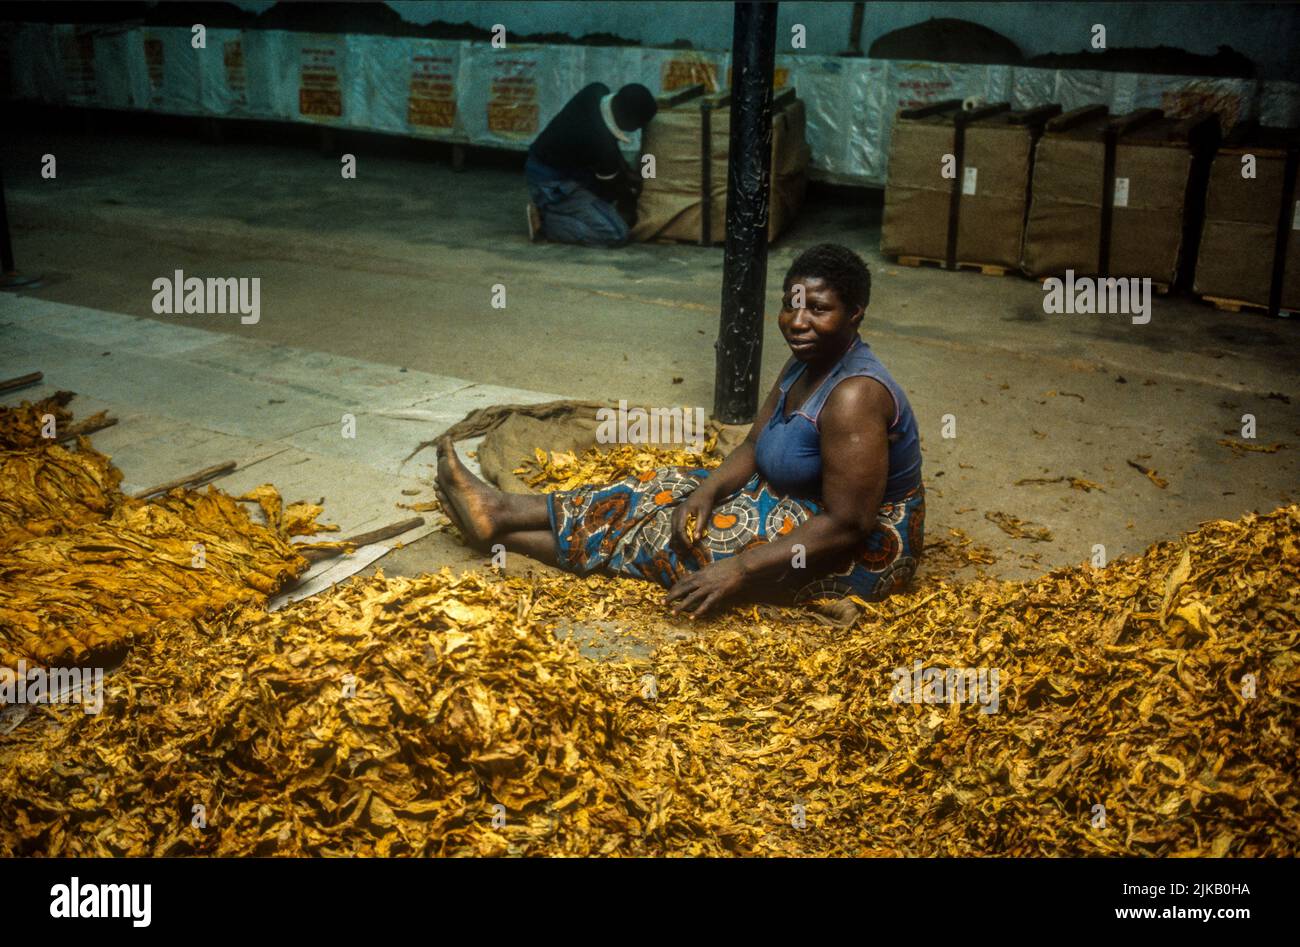 Lone female factory worker in a tobacco factory in Africa. Stock Photo